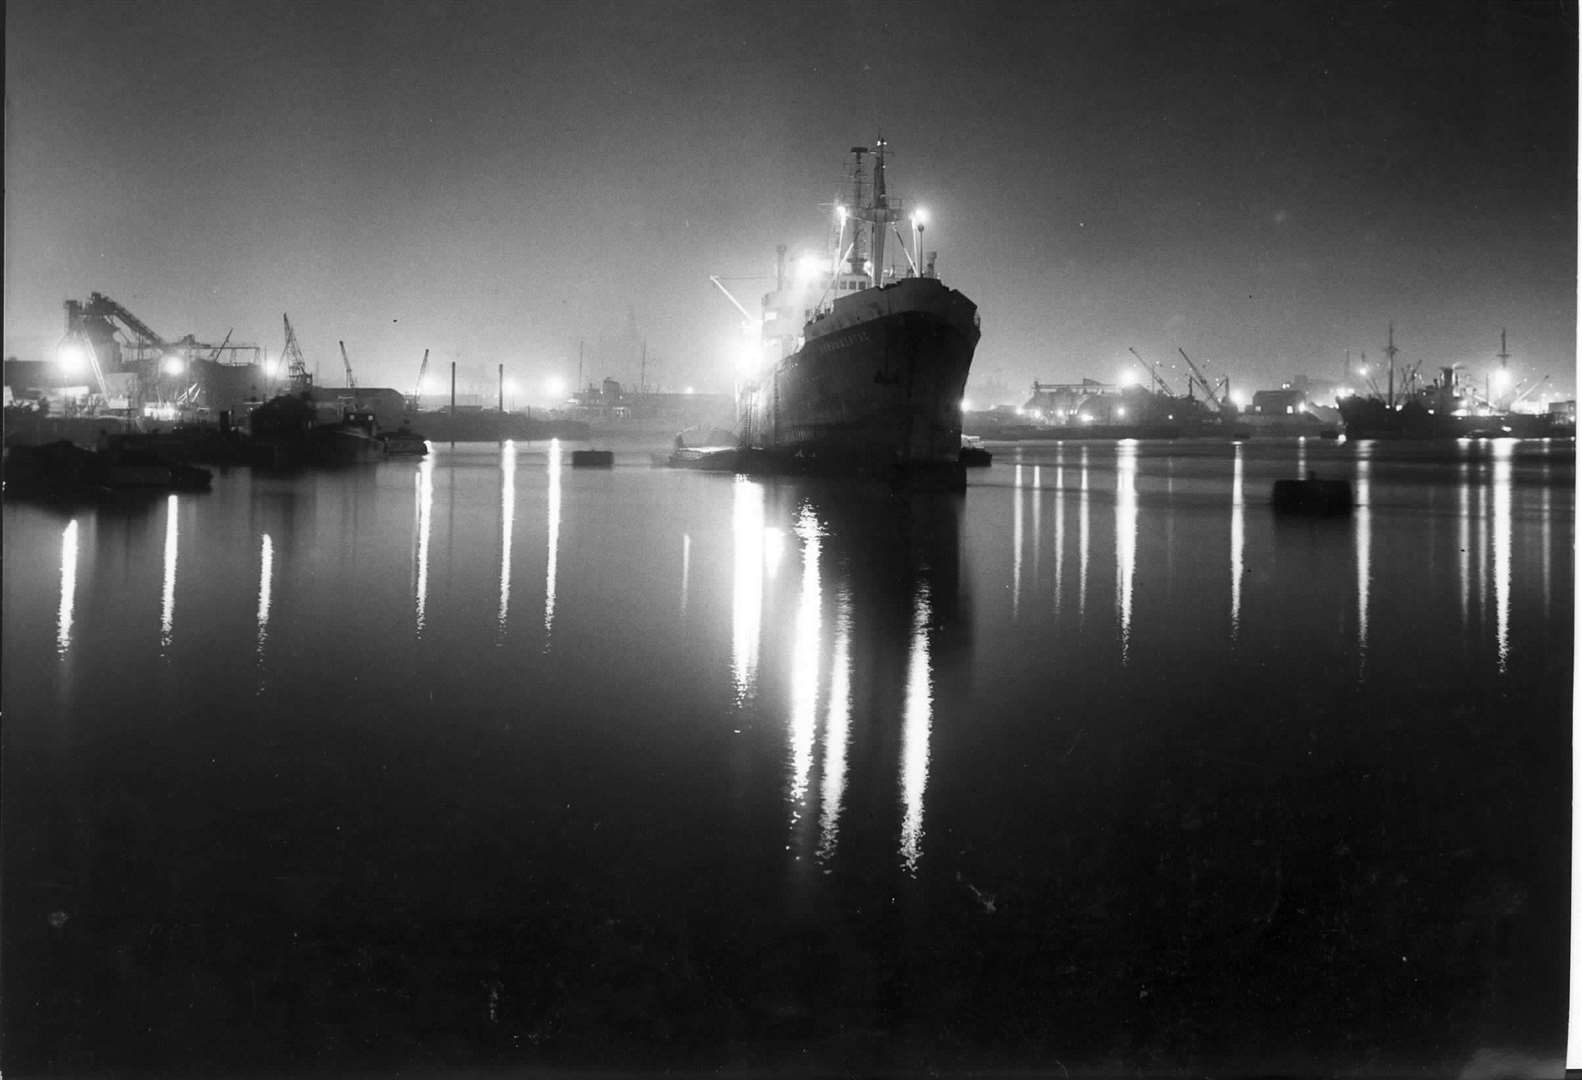 Night view of ships on the River Medway